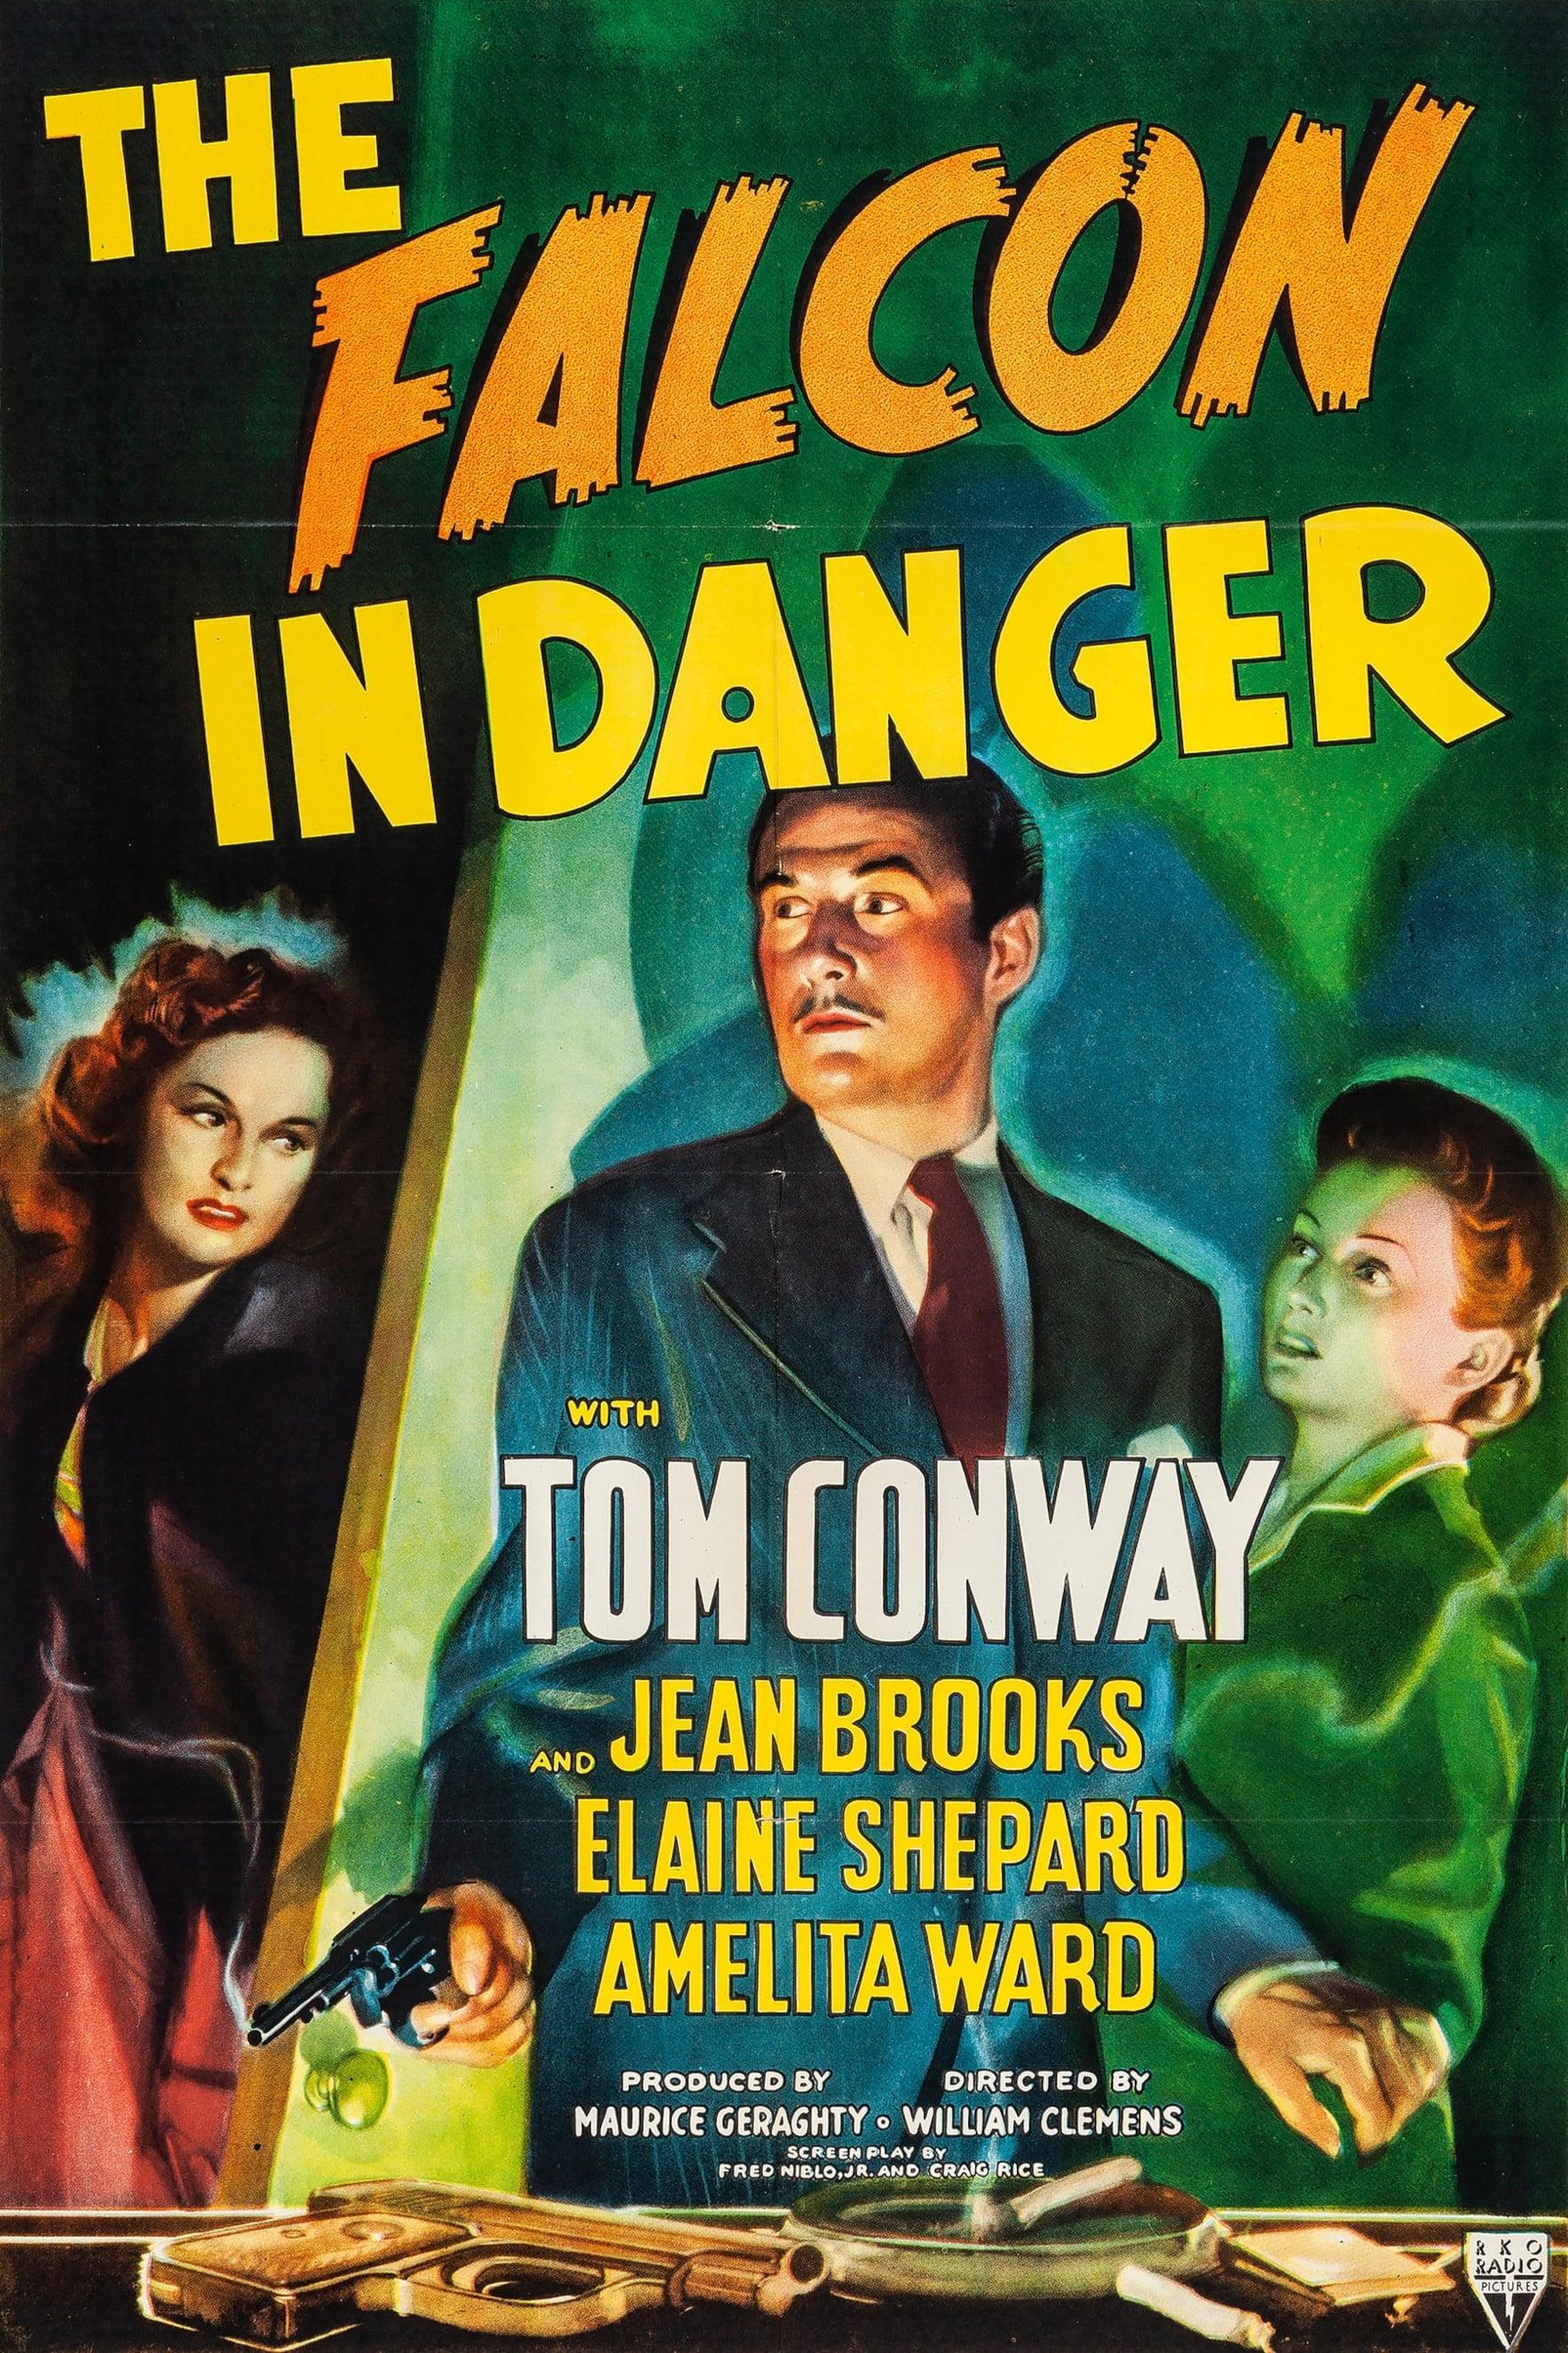 The Falcon in Danger poster